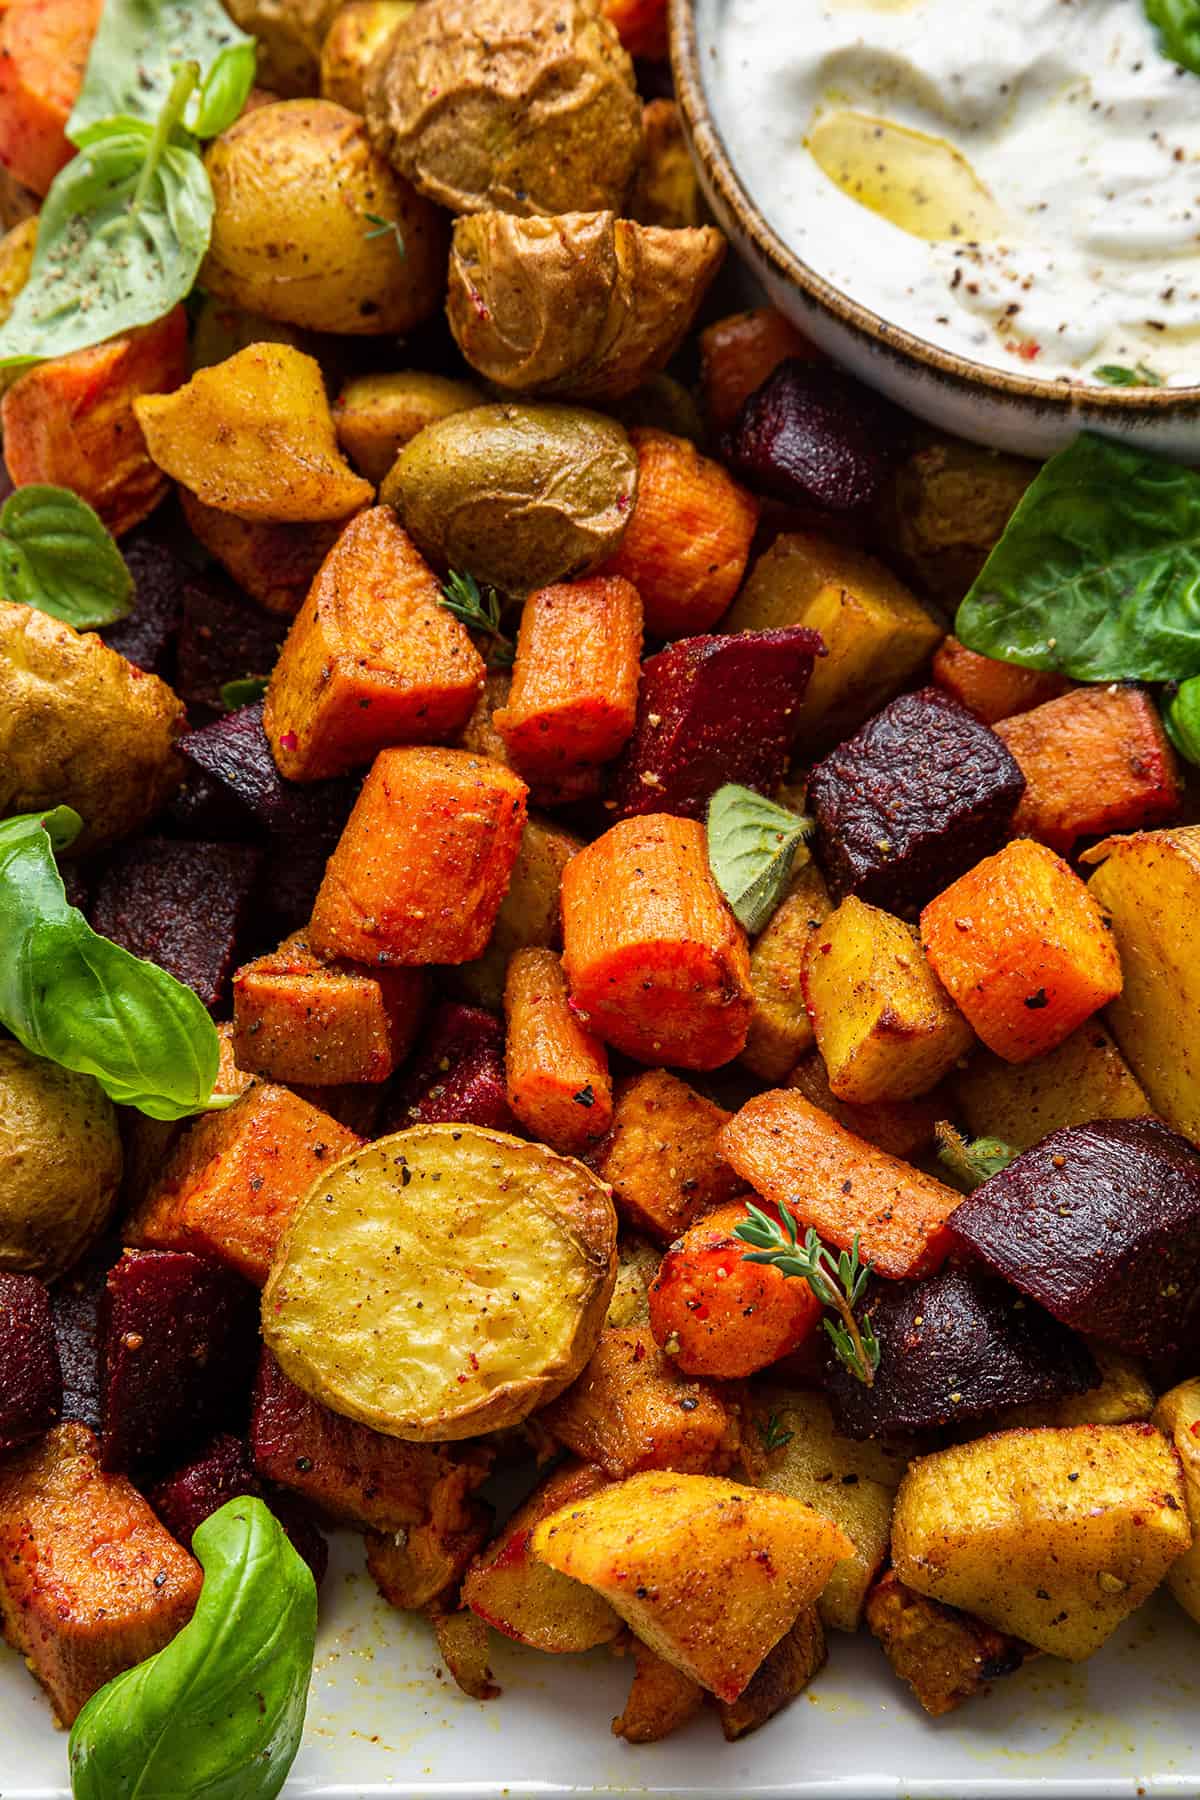 Overhead view of roasted root vegetables with bowl of yogurt dip